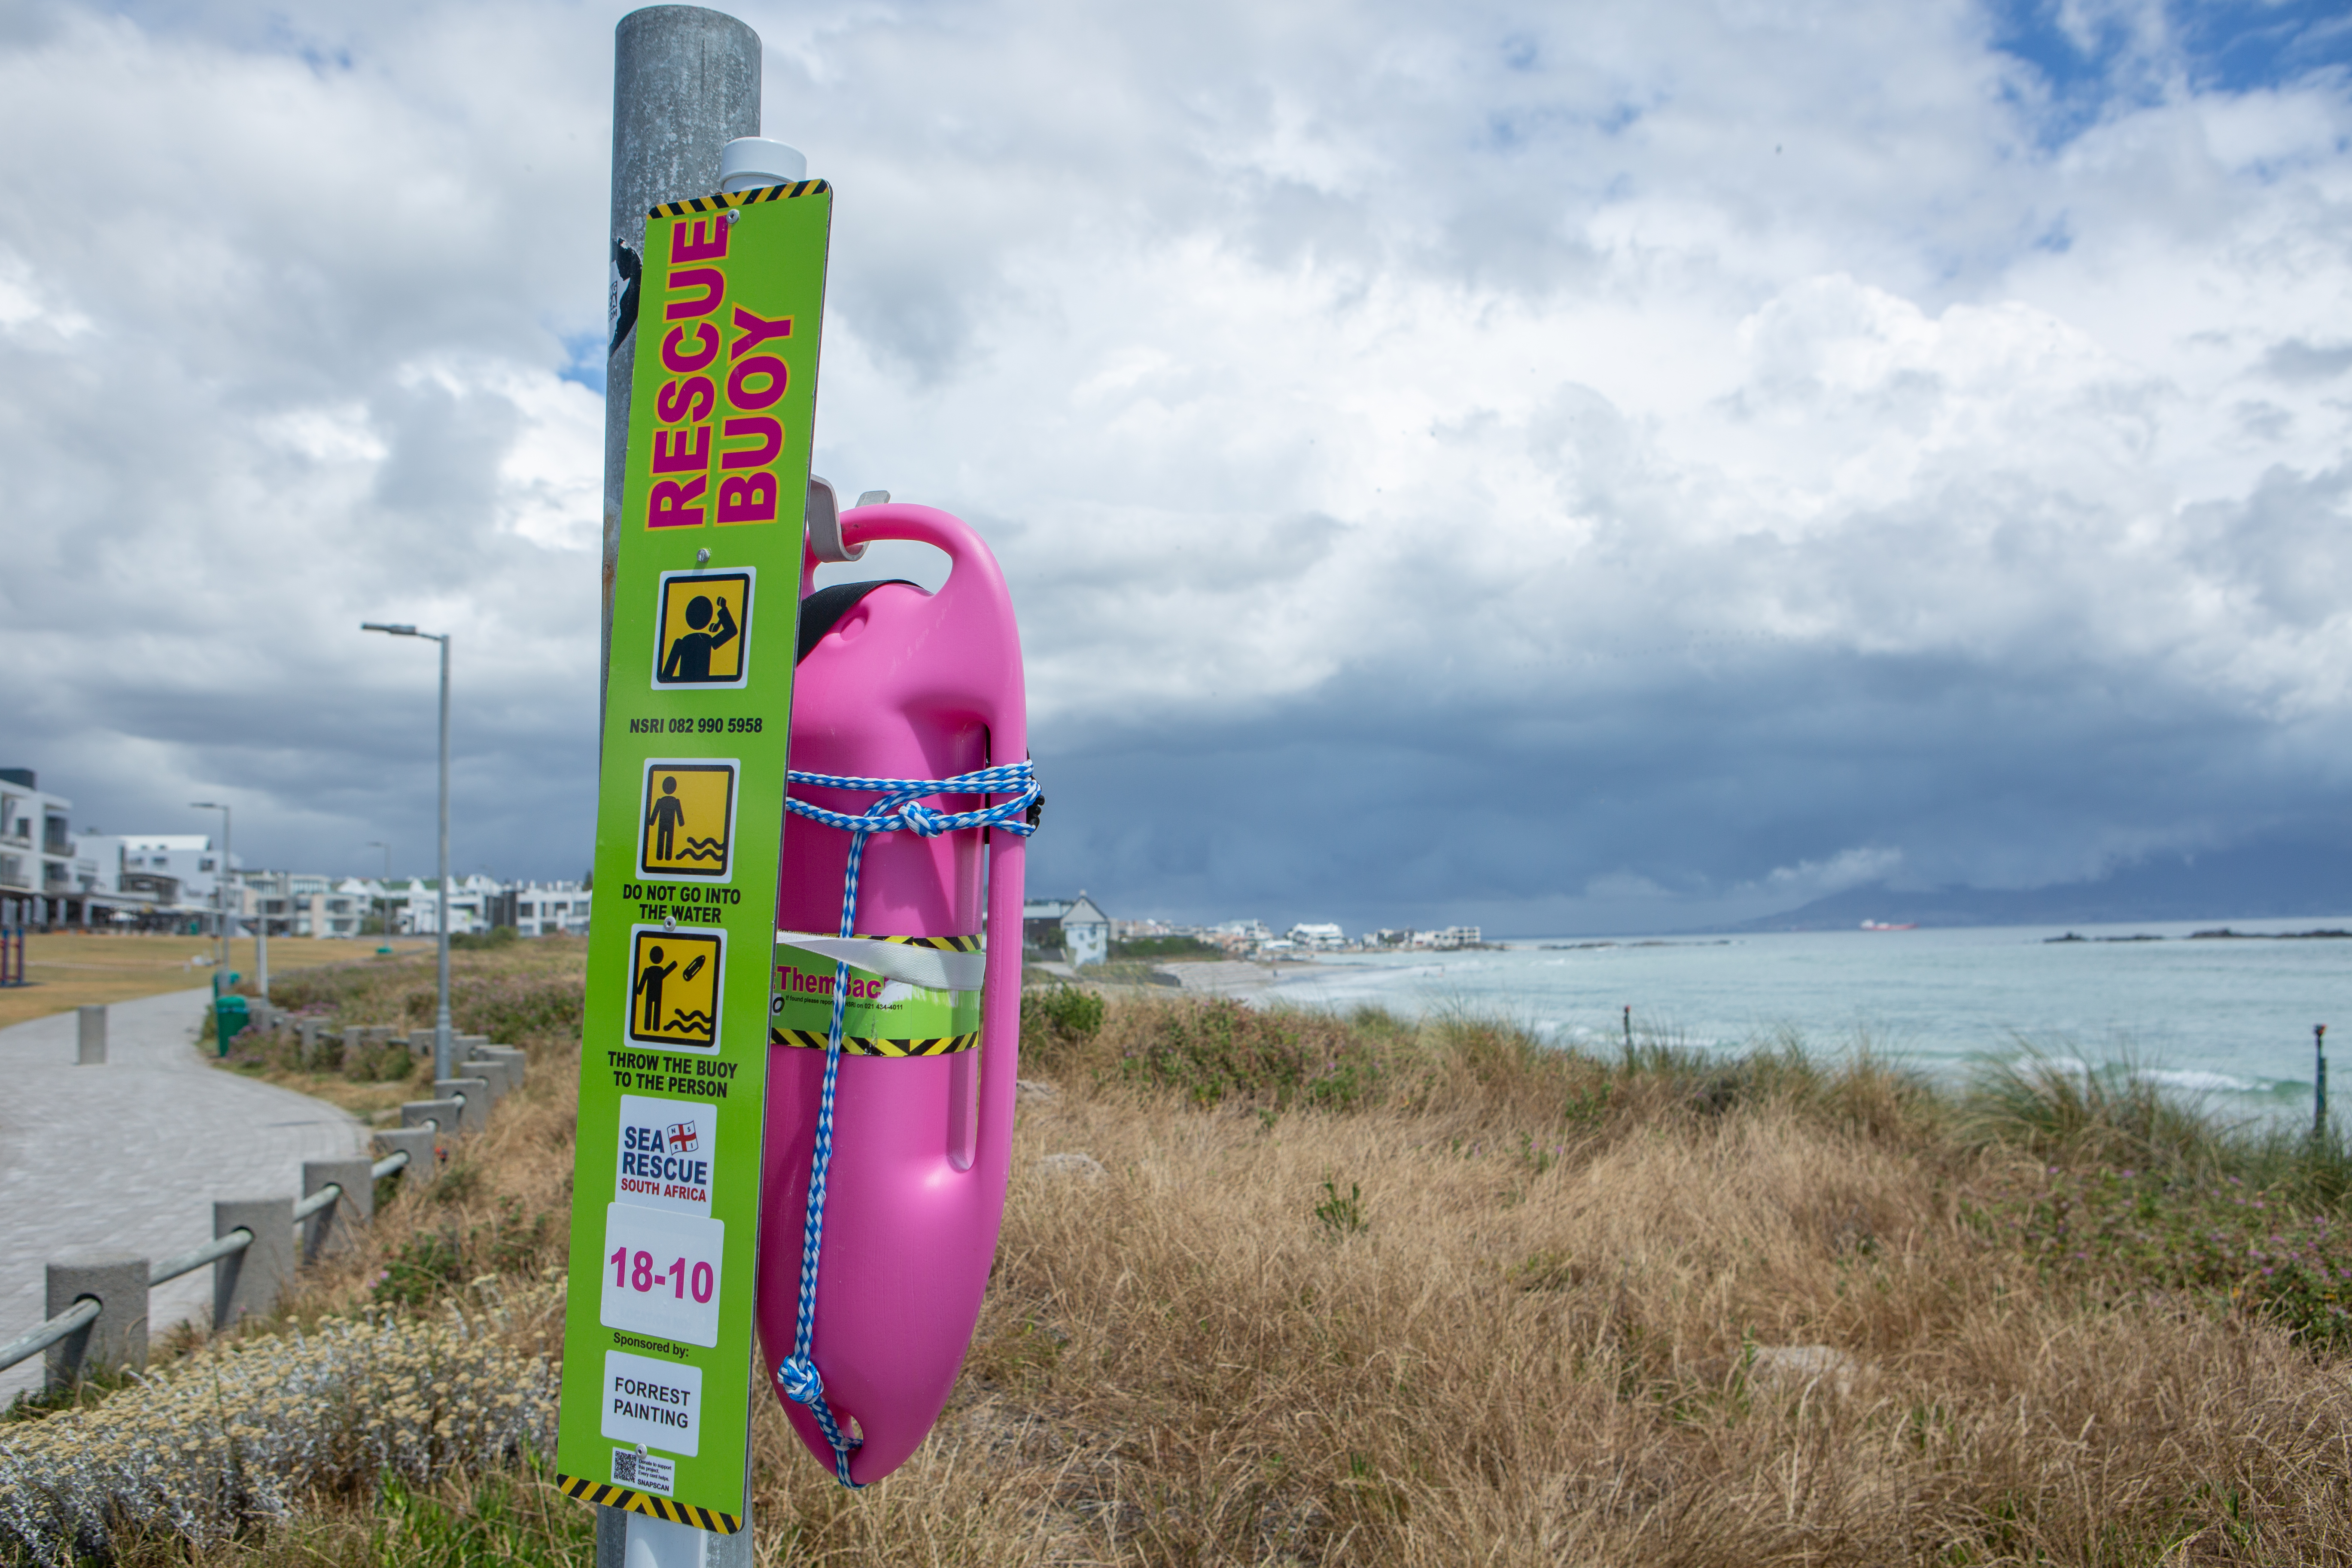 A Pink Rescue Buoy on November 17, 2021 in Cape Town, South Africa. The Pink Rescue Buoy project is part of an extensive National Drowning Prevention Campaign started by the NSRI during 2017. 